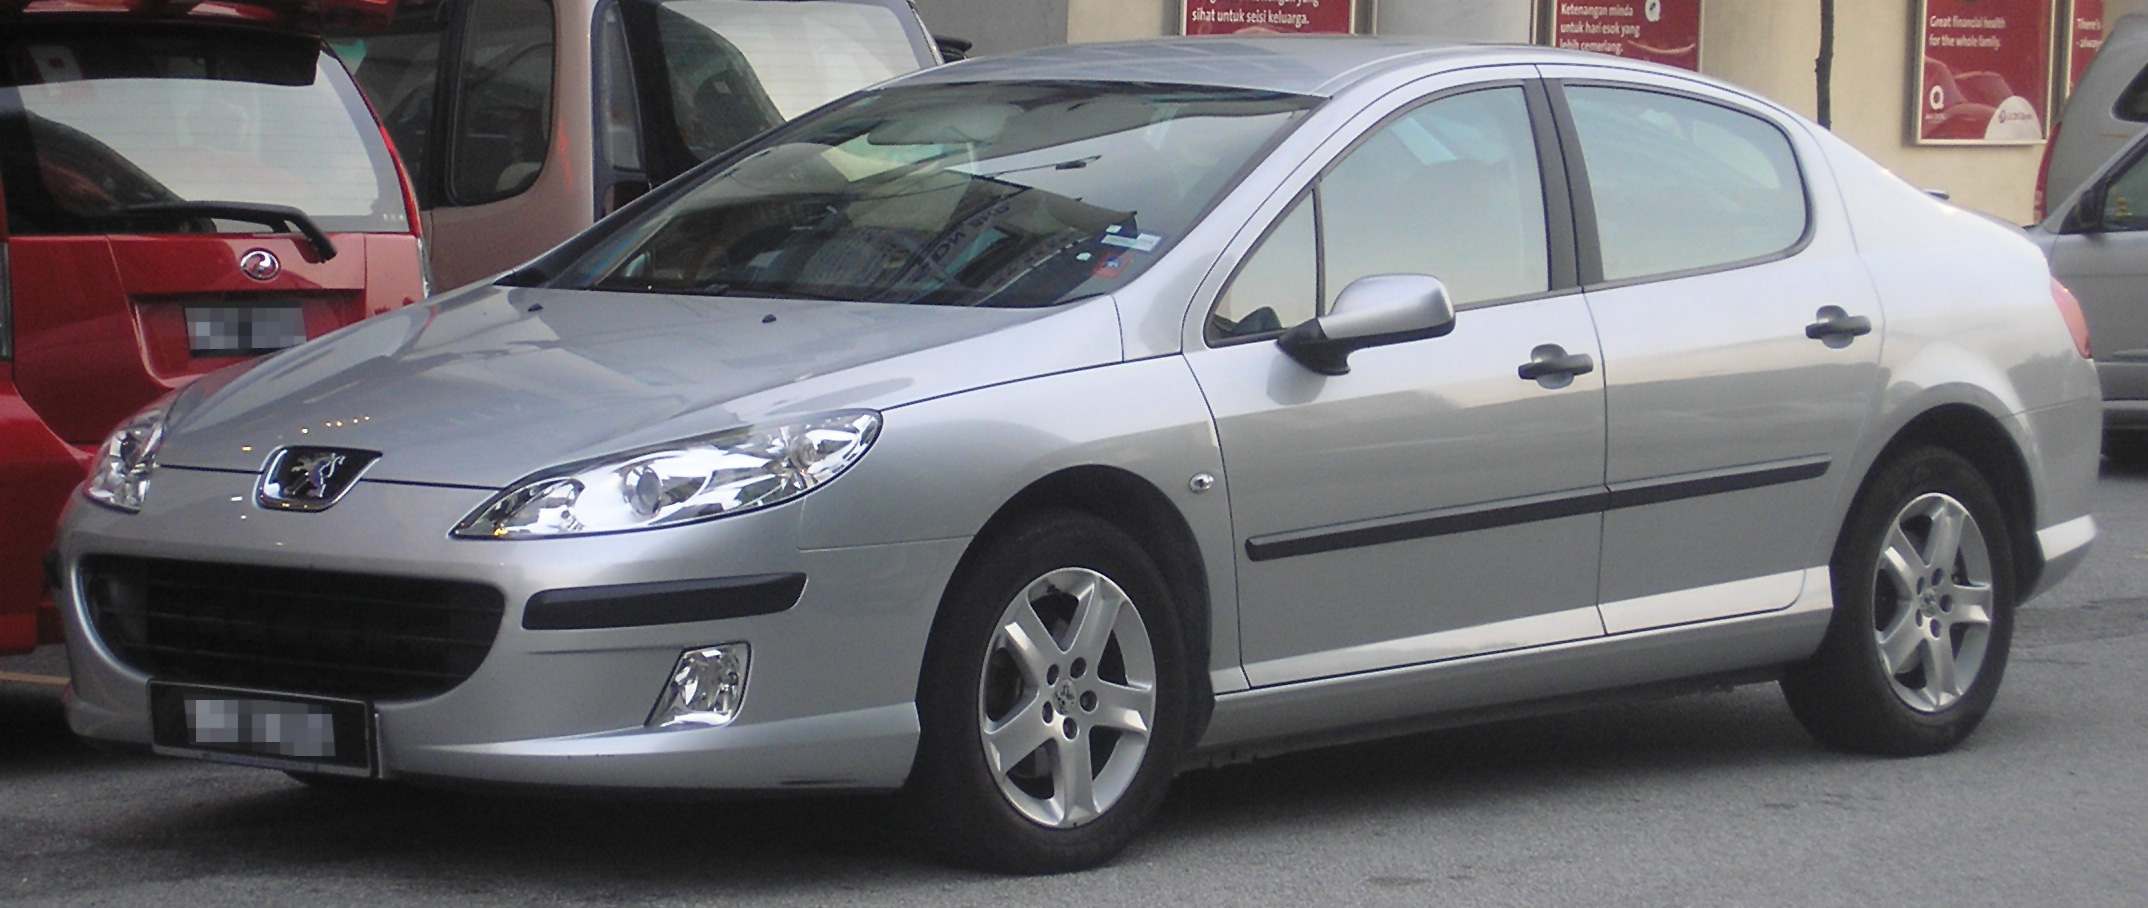 High Quality Tuning Files Peugeot 407 2.0 HDI 128hp